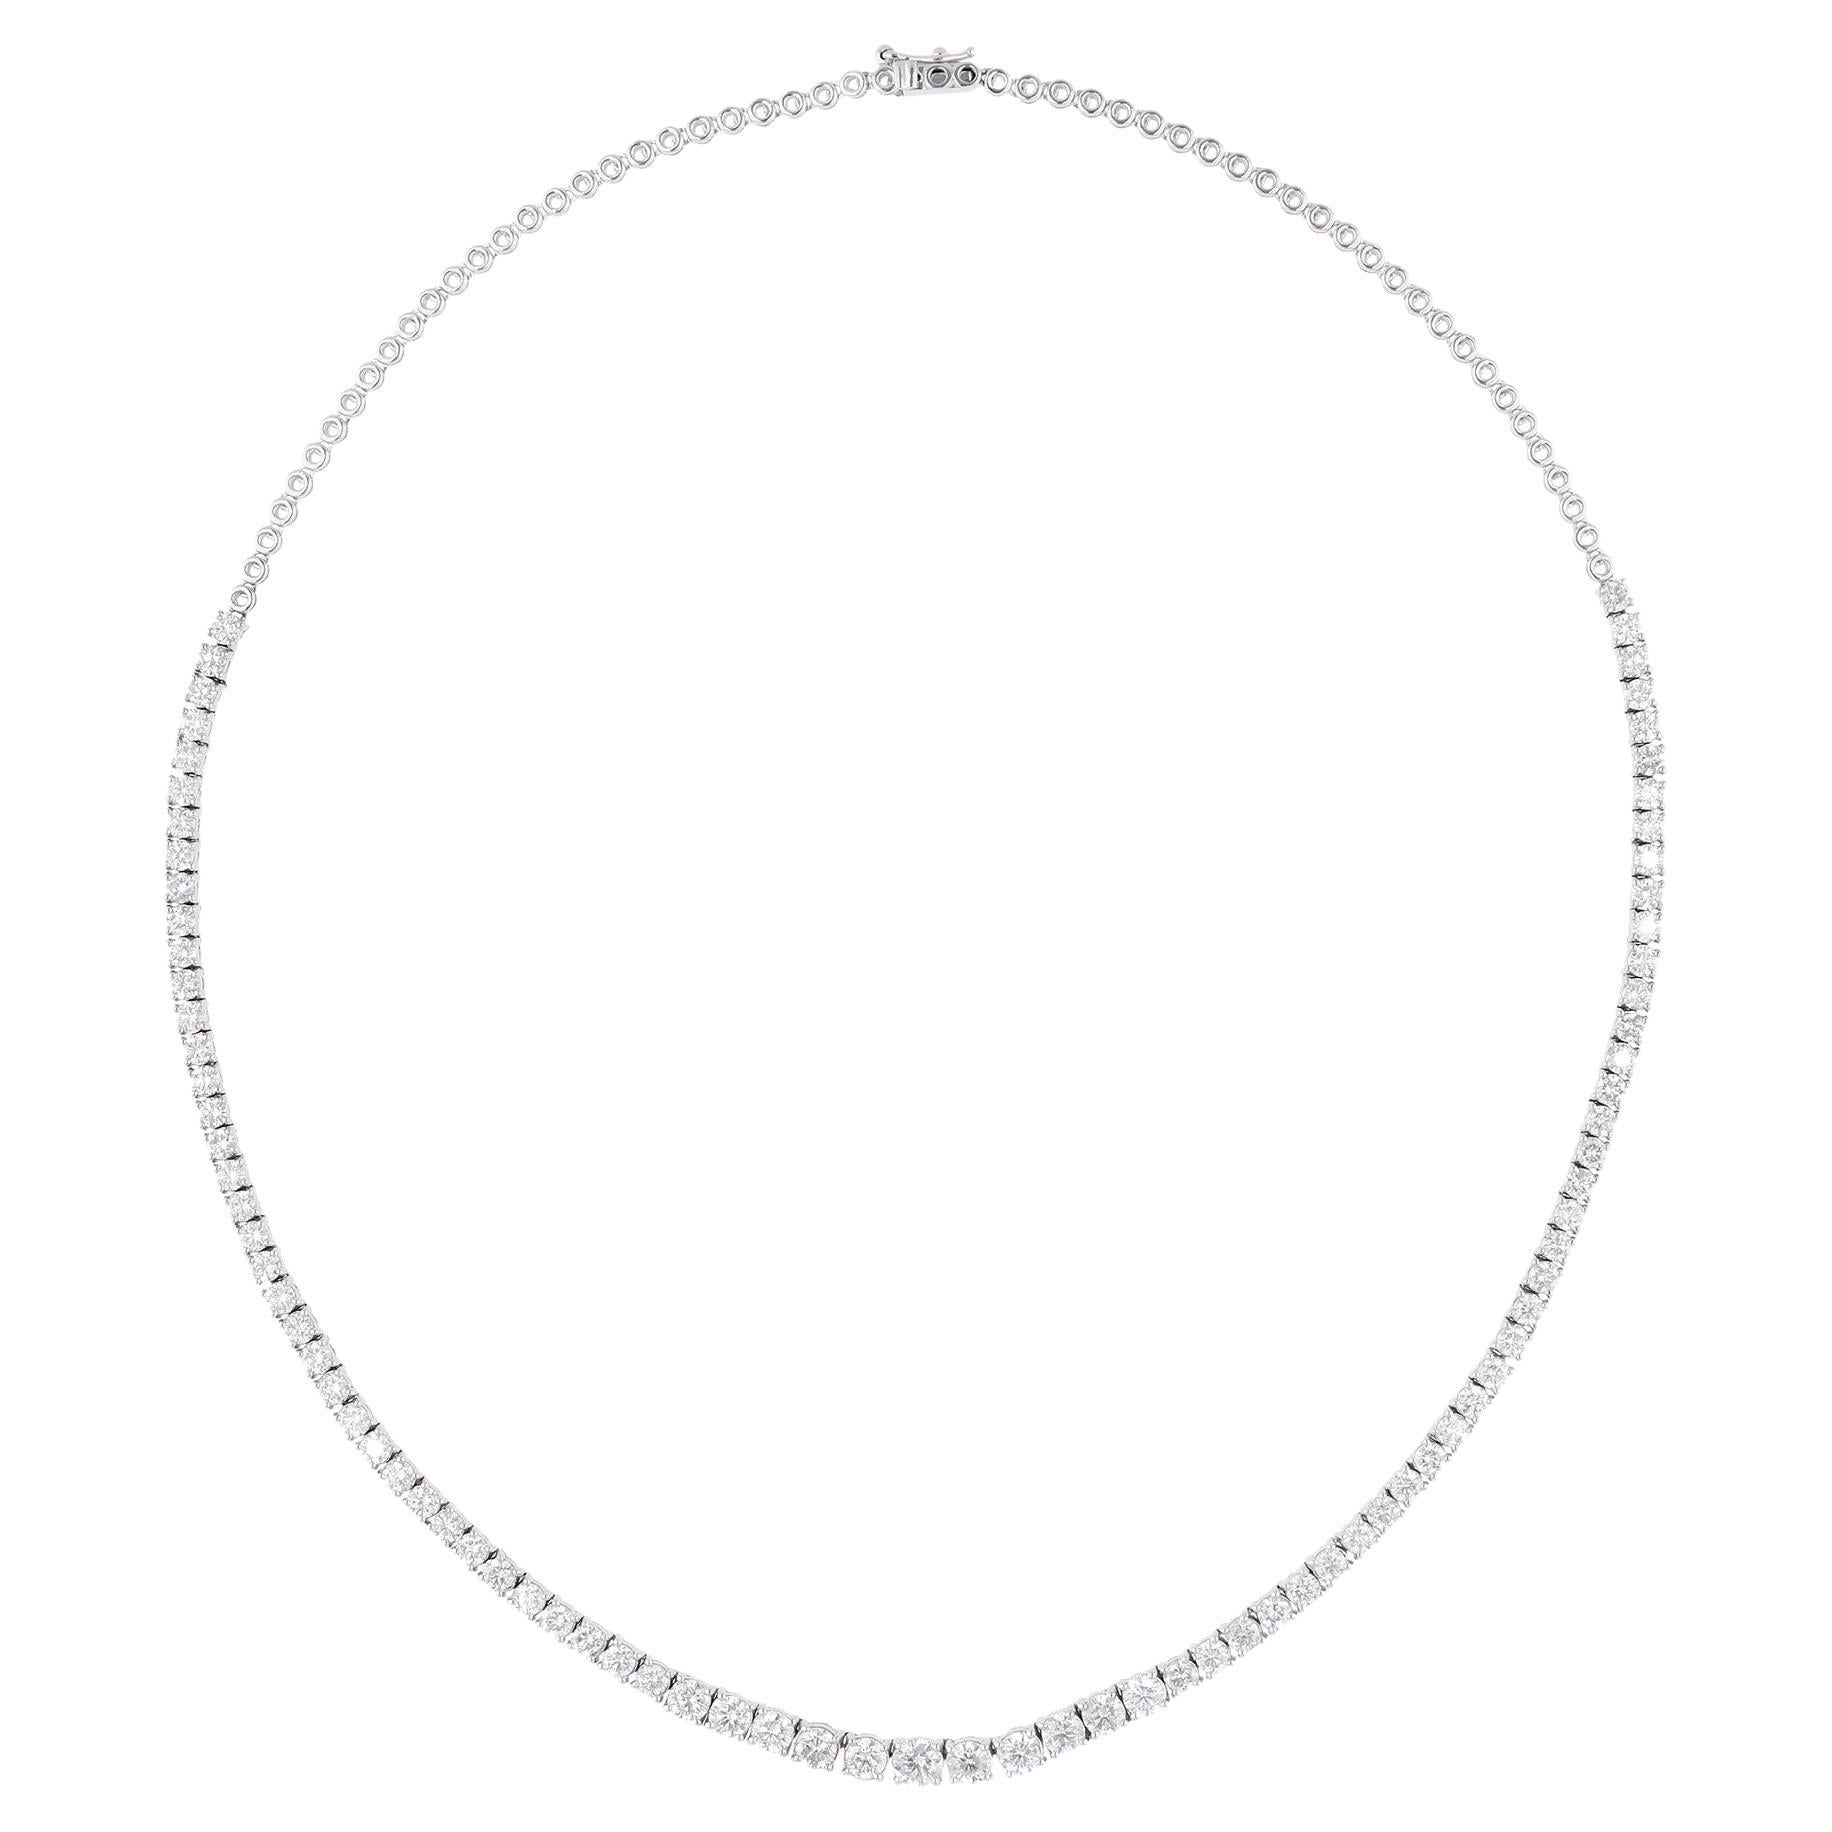 Real 7.18 Carat SI Clarity HI Color Diamond Chain Necklace 14 Karat White Gold For Sale